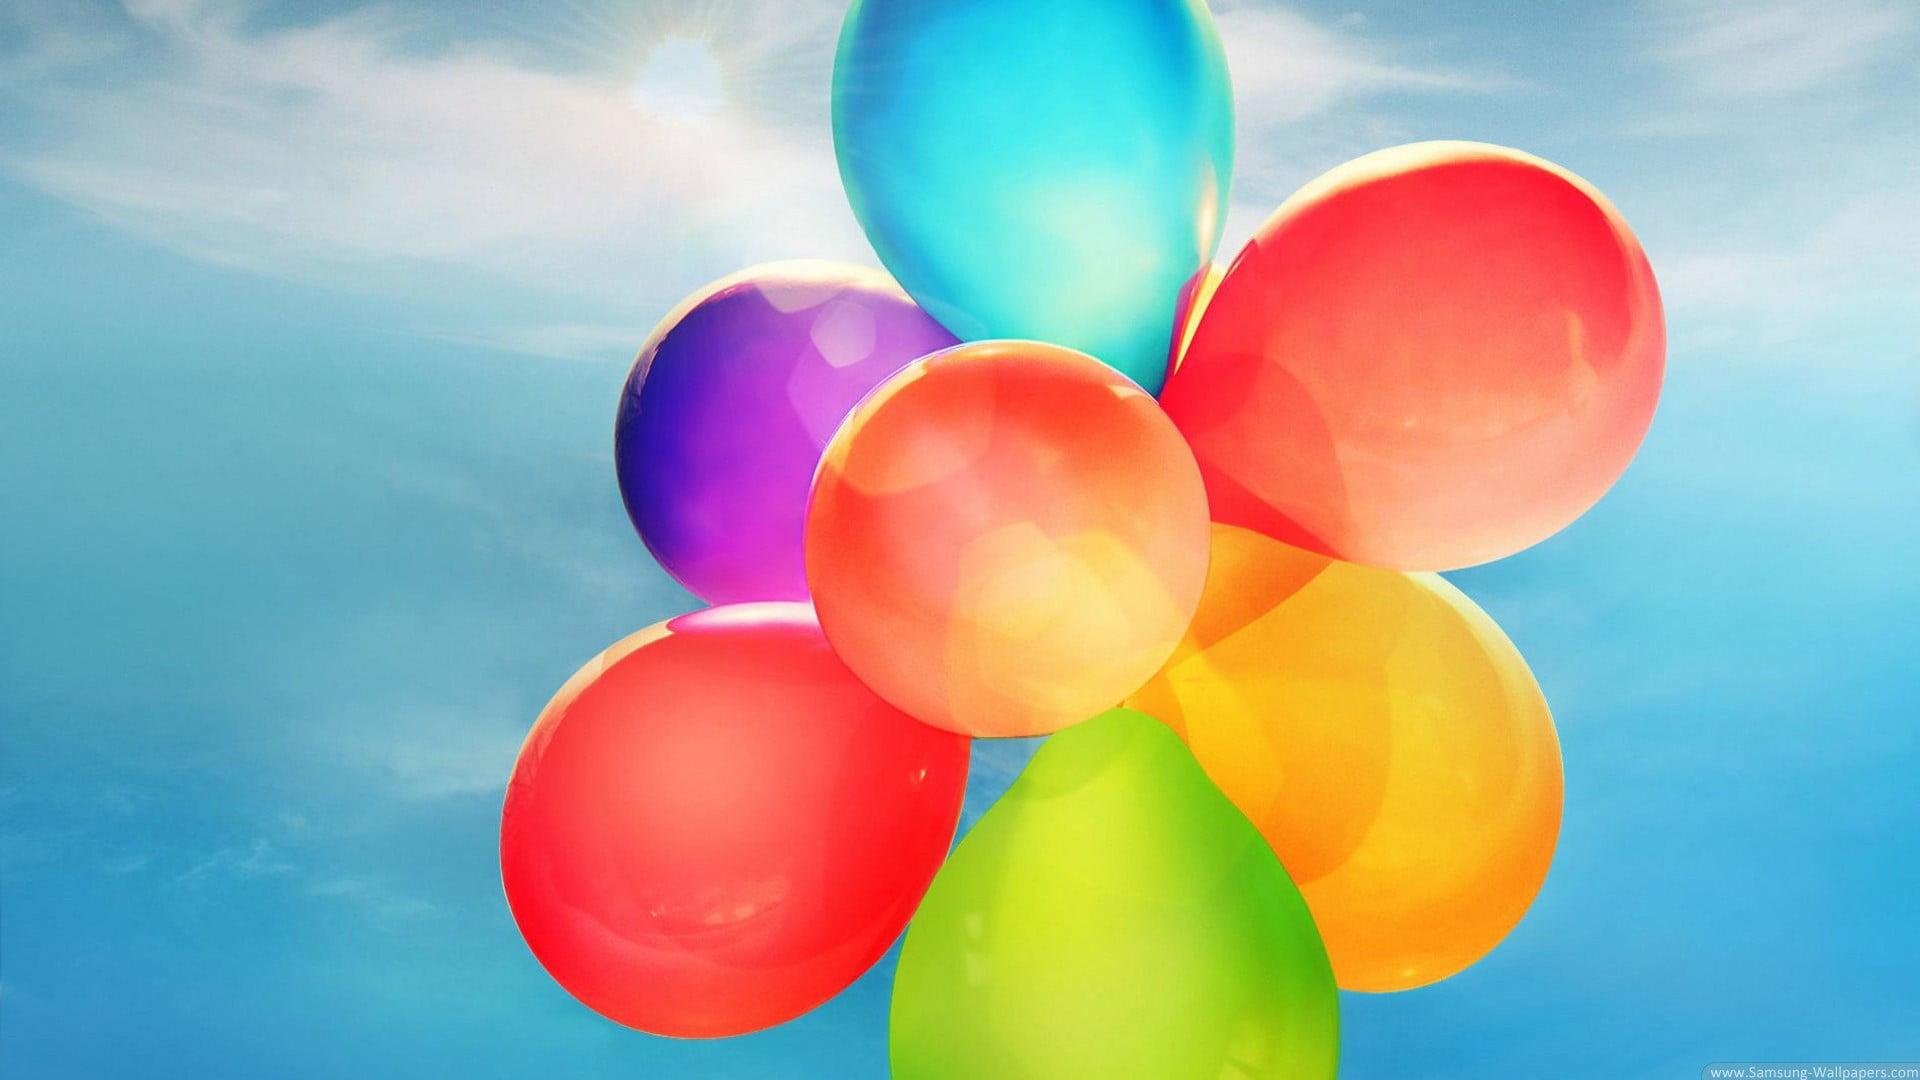 Assorted Color Balloon Lot, Balloon, Colorful HD Wallpaper